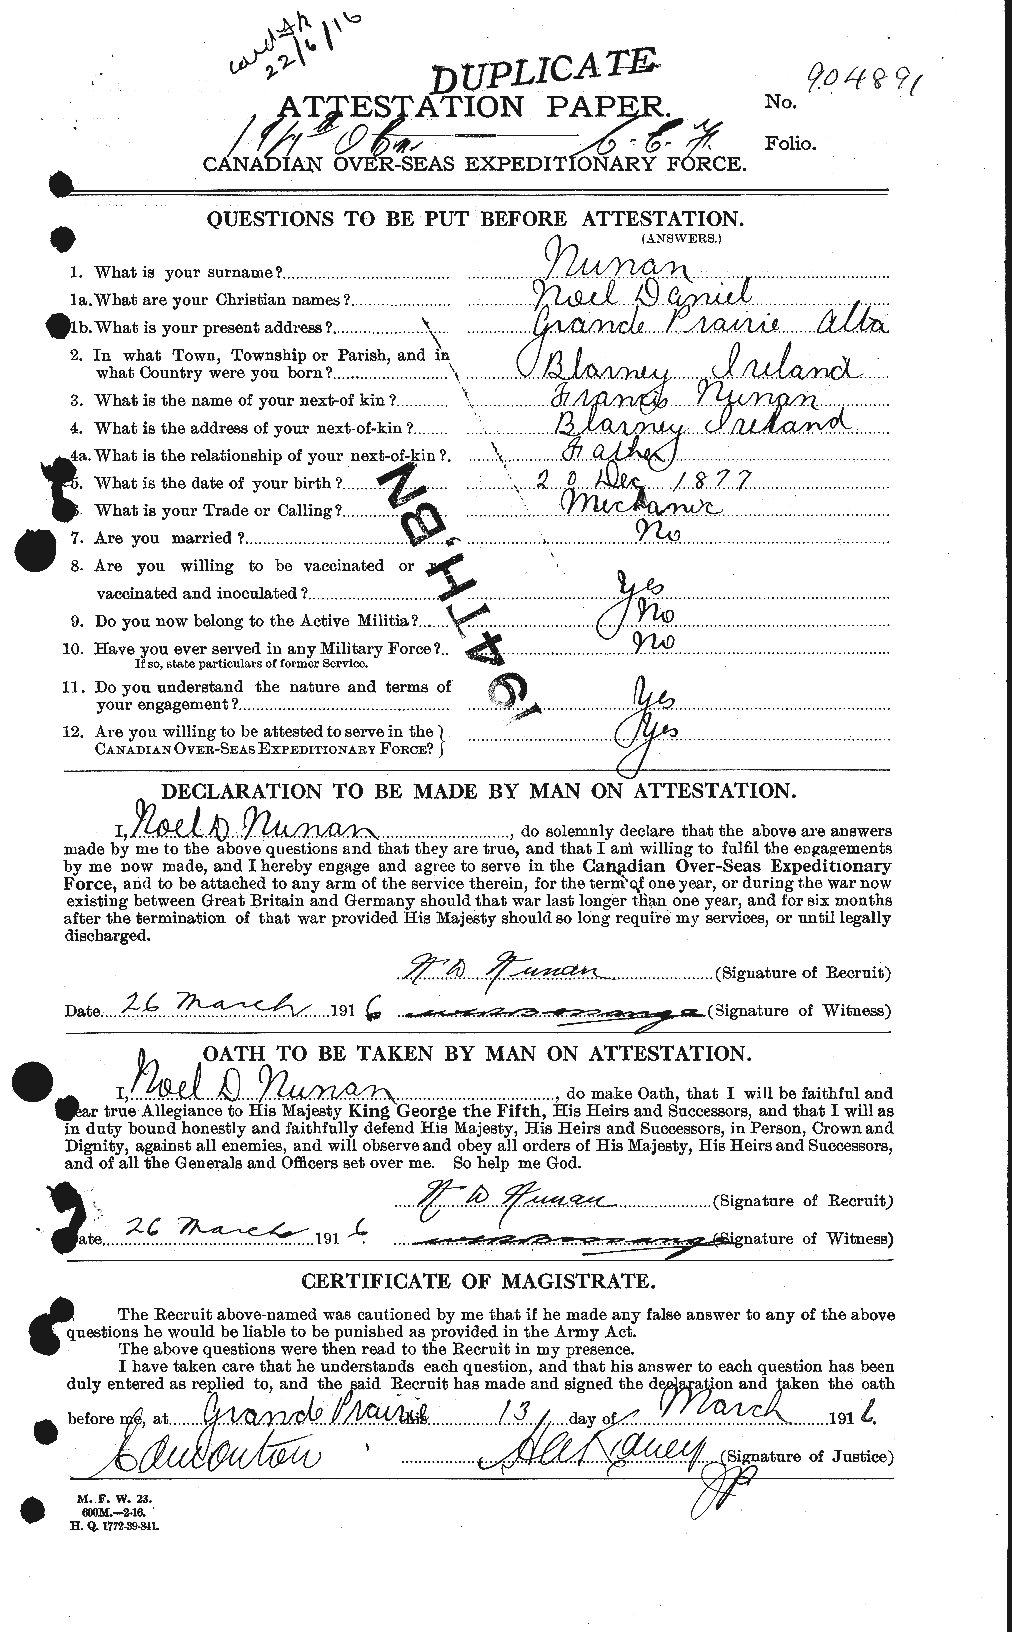 Personnel Records of the First World War - CEF 553278a